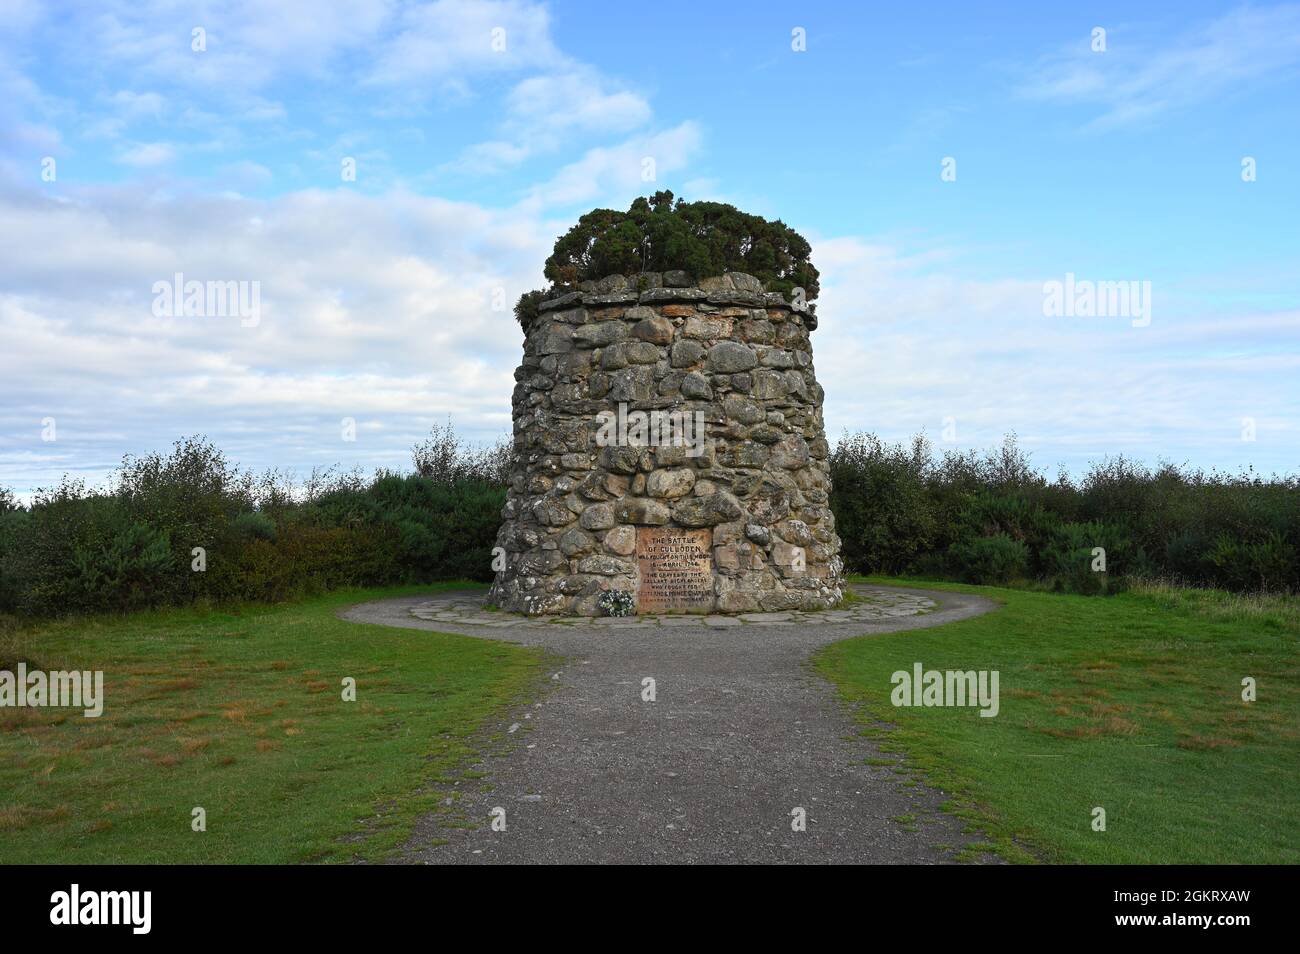 Circular stone monument at Culloden Moor, the site of a famous battle and a popular tourist attraction. Blue sky, clouds, no people. Stock Photo